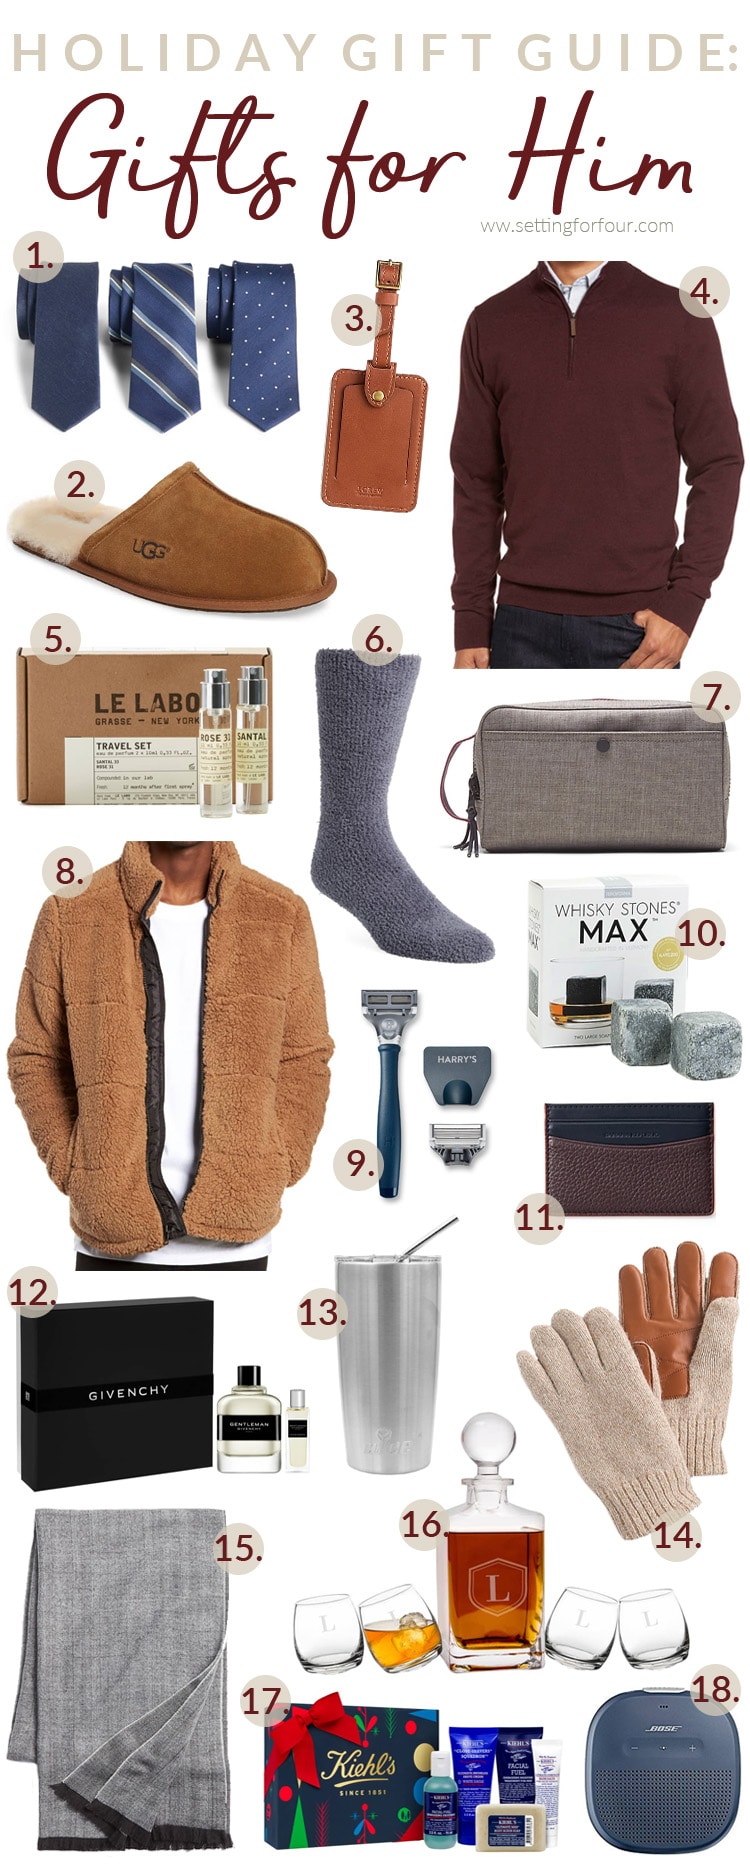 Holiday Gift Guide for Him - see my top present and stocking stuffer finds for the men in our lives that are so hard to shop for!